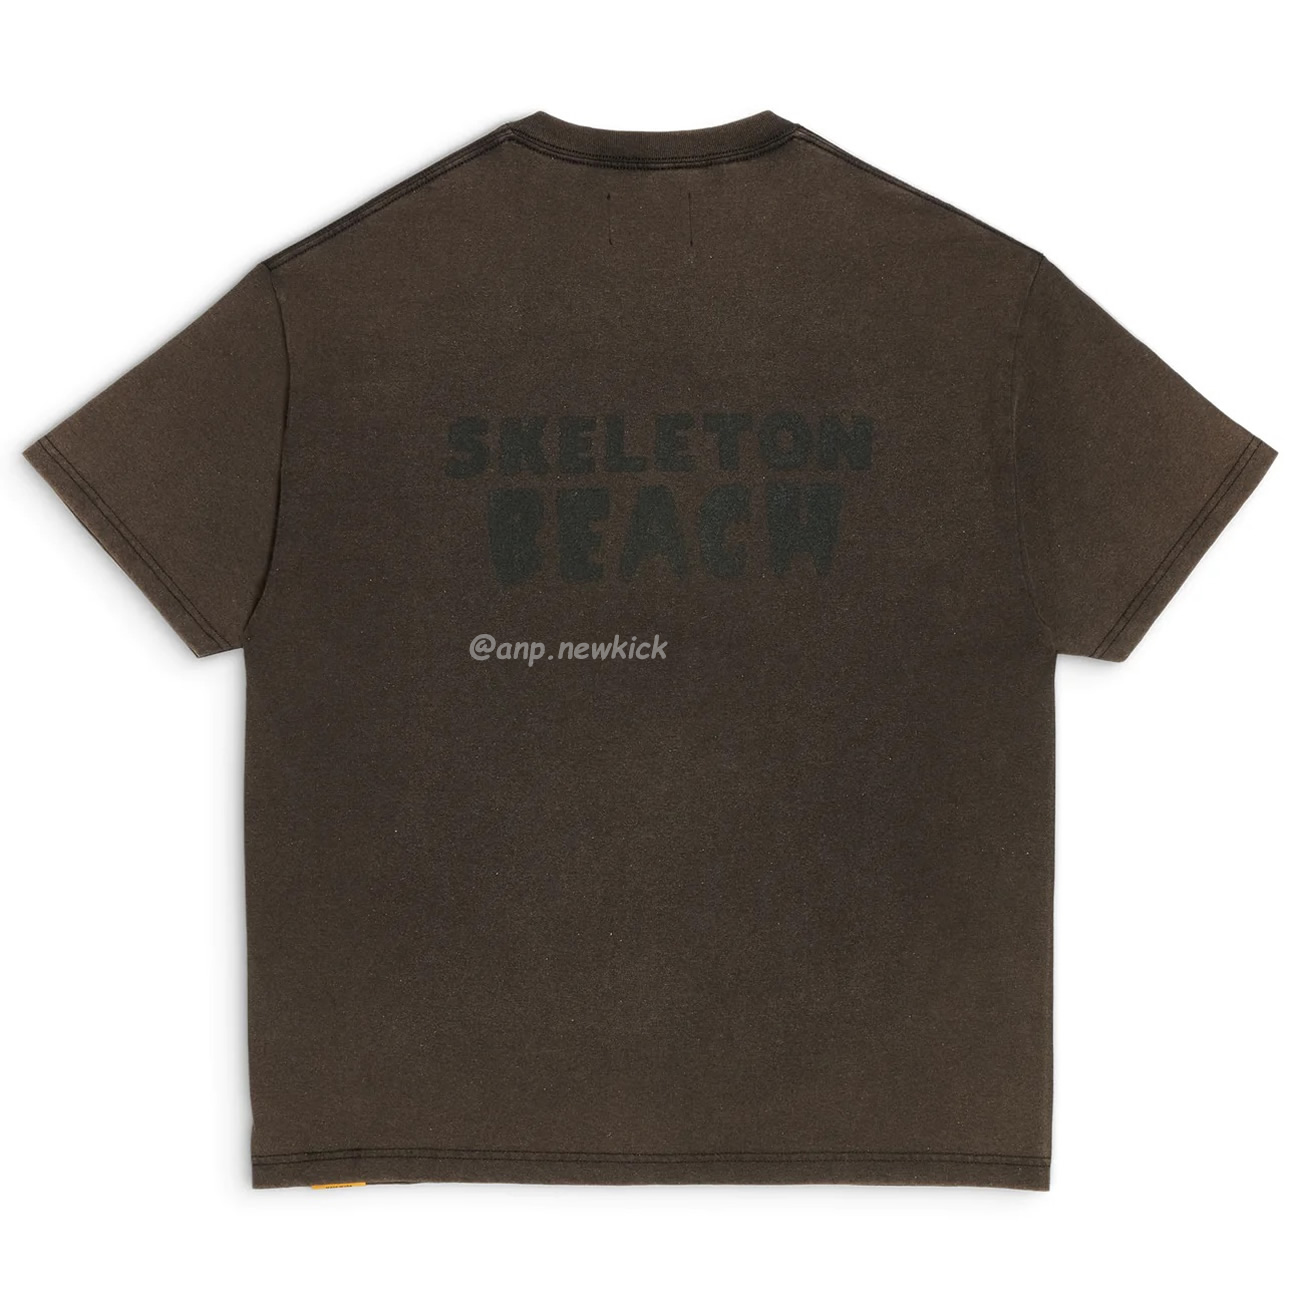 Gallery Dept Music Lives On Atk Tee Art Design Exclusive Retro Distressed Washed Short Sleeve T Shirt (3) - newkick.org